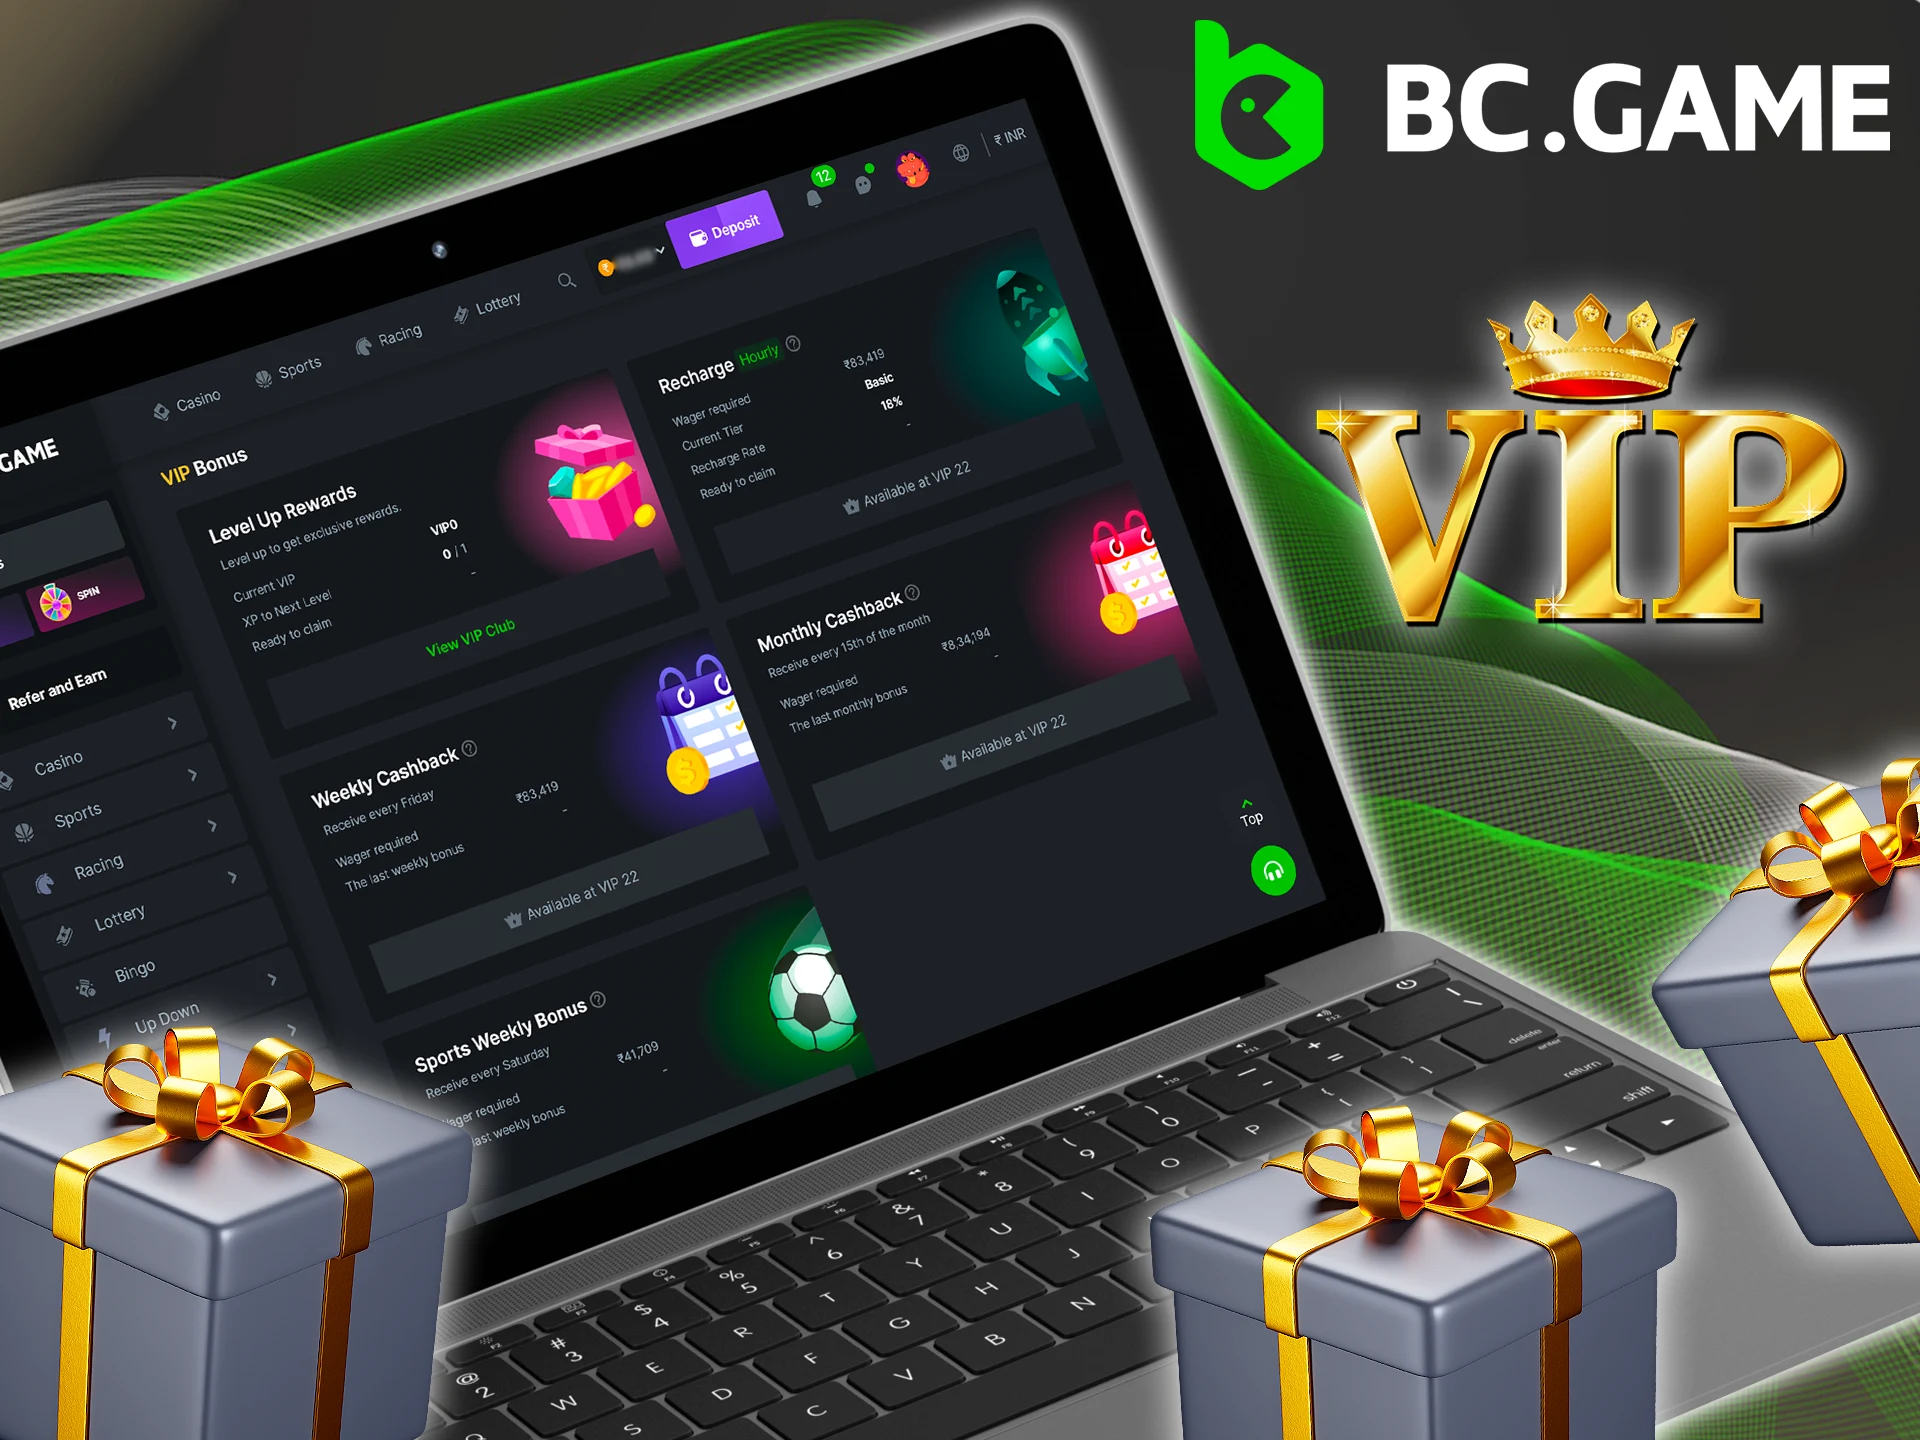 Join BC Game's VIP program to receive exclusive bonuses.